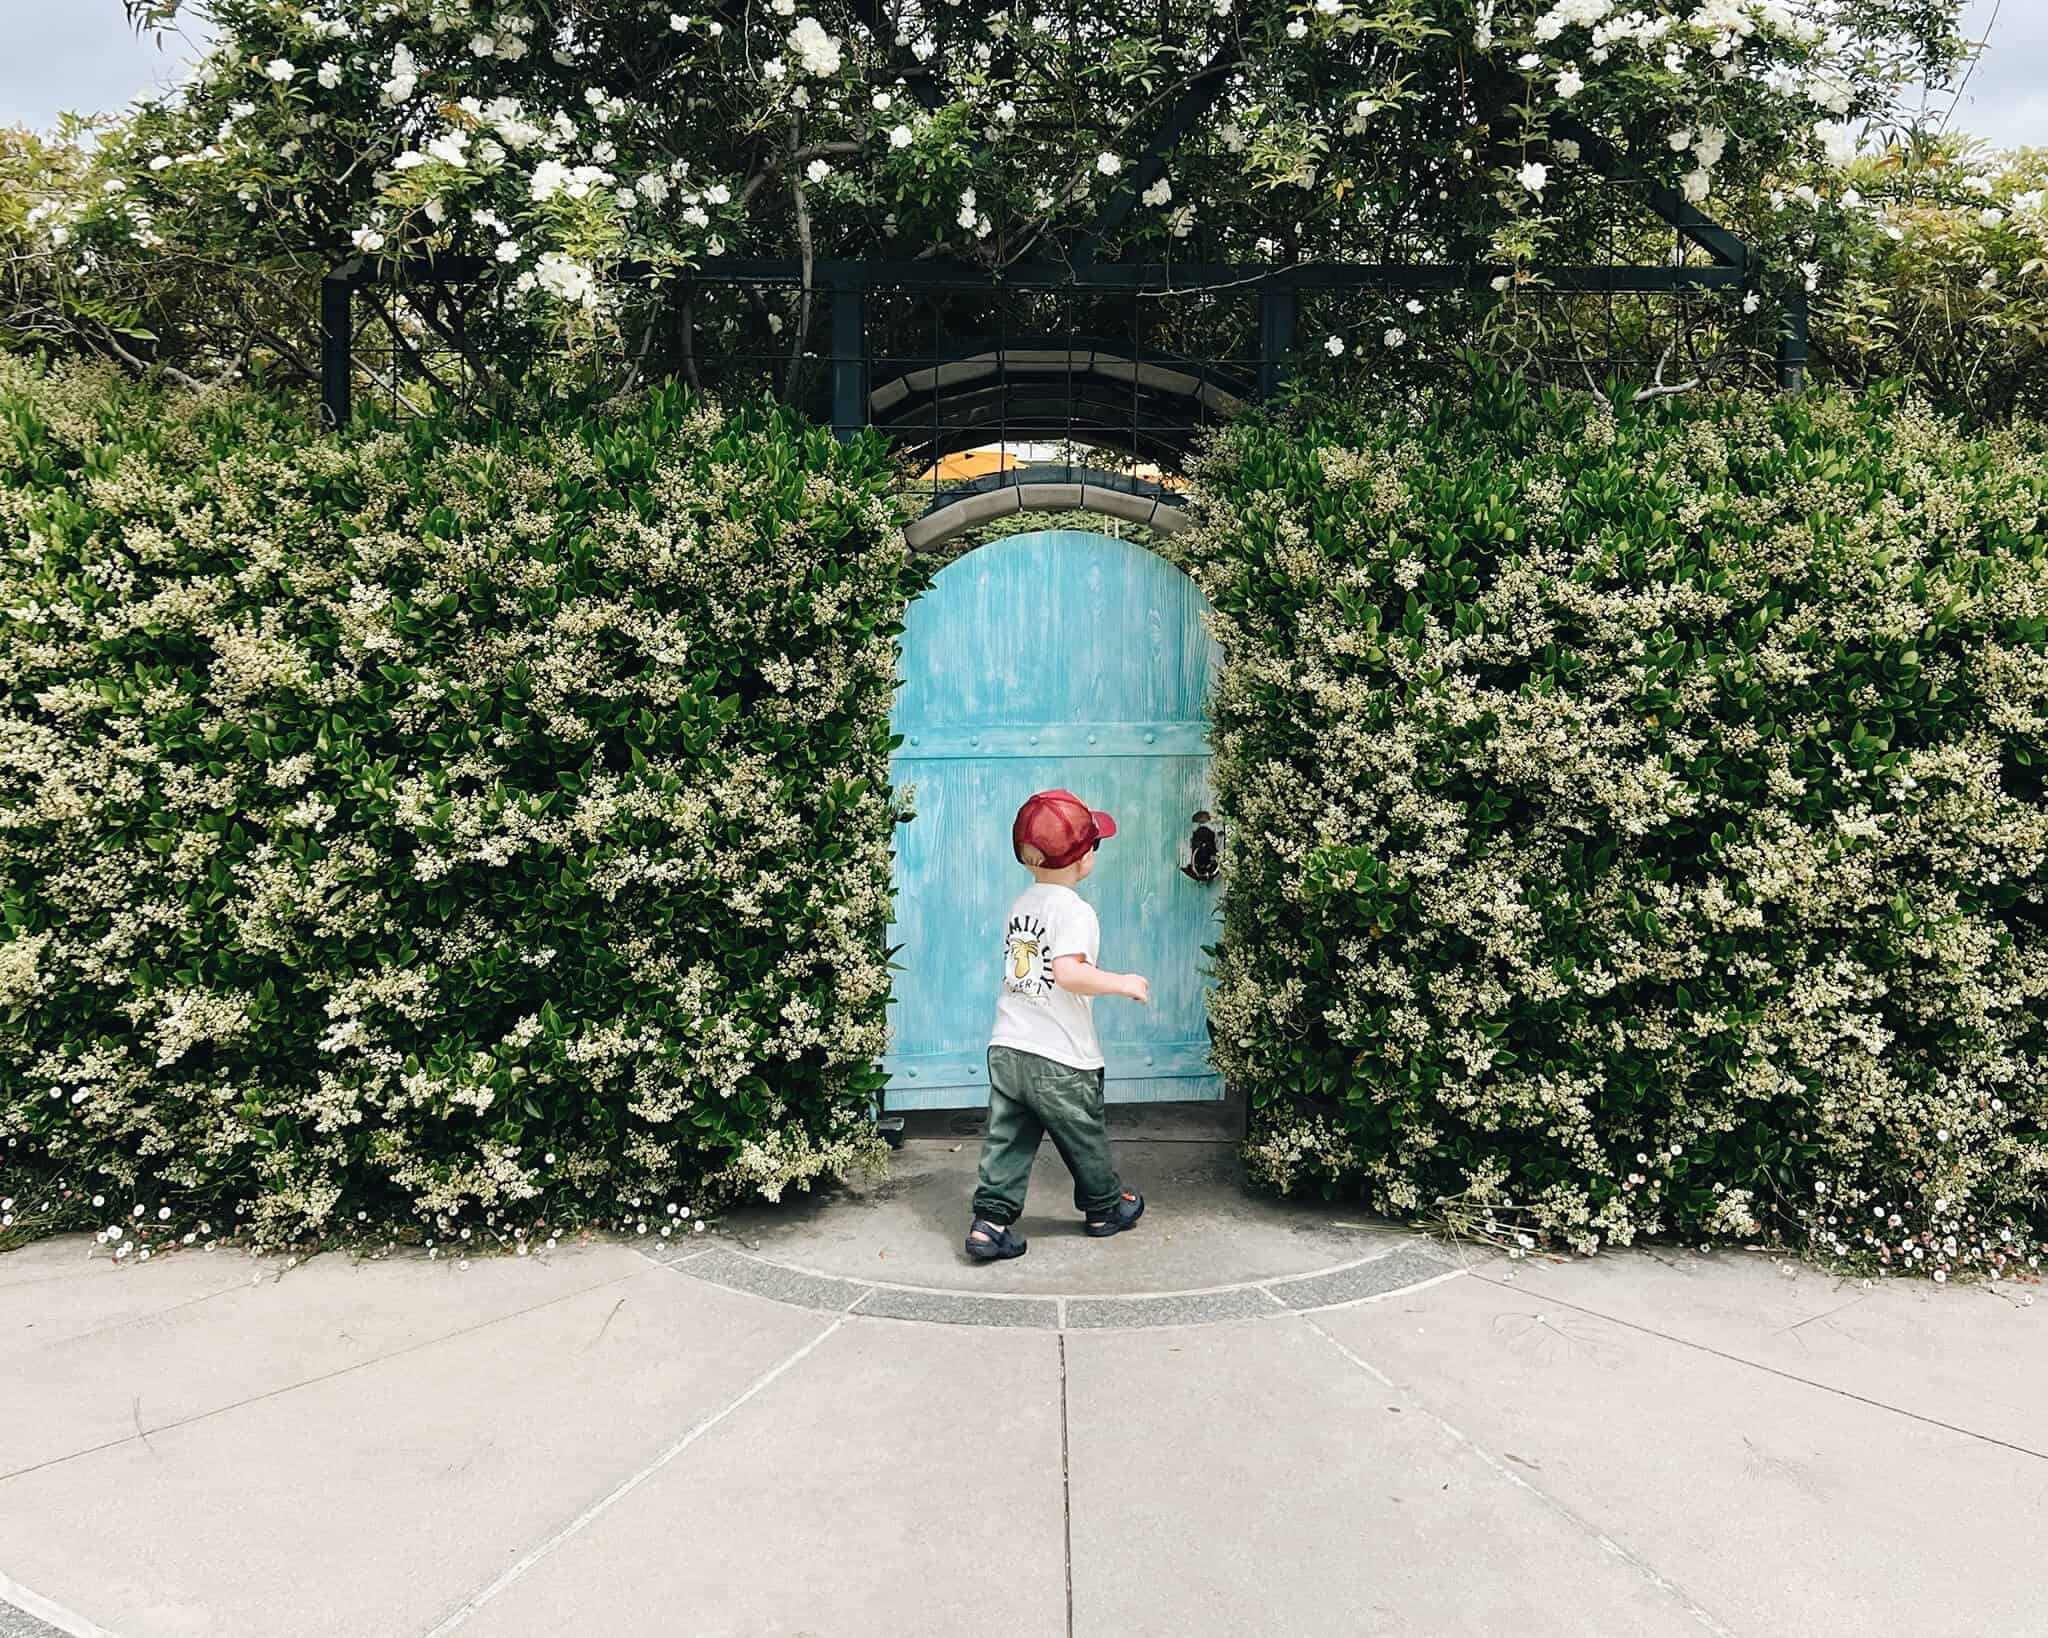 a young boy curiously stands in front of a blue door in a garden